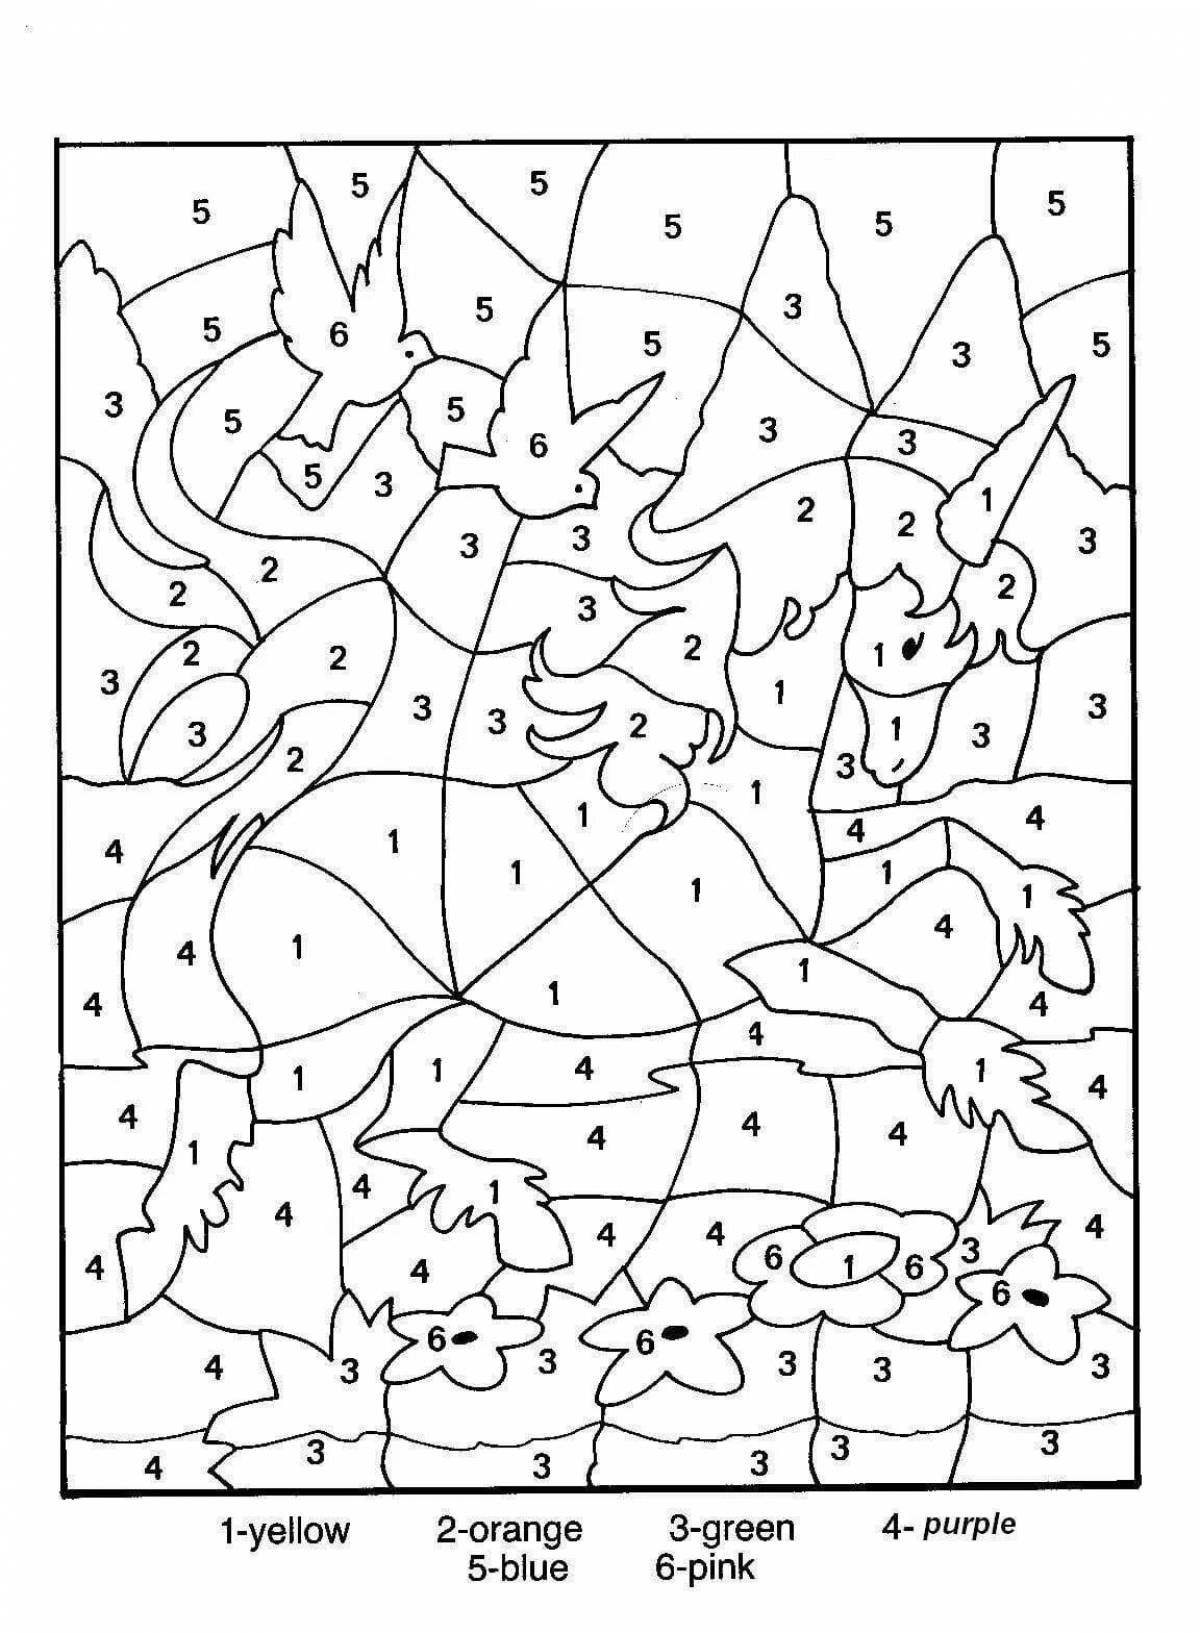 Fun find game by numbers coloring page